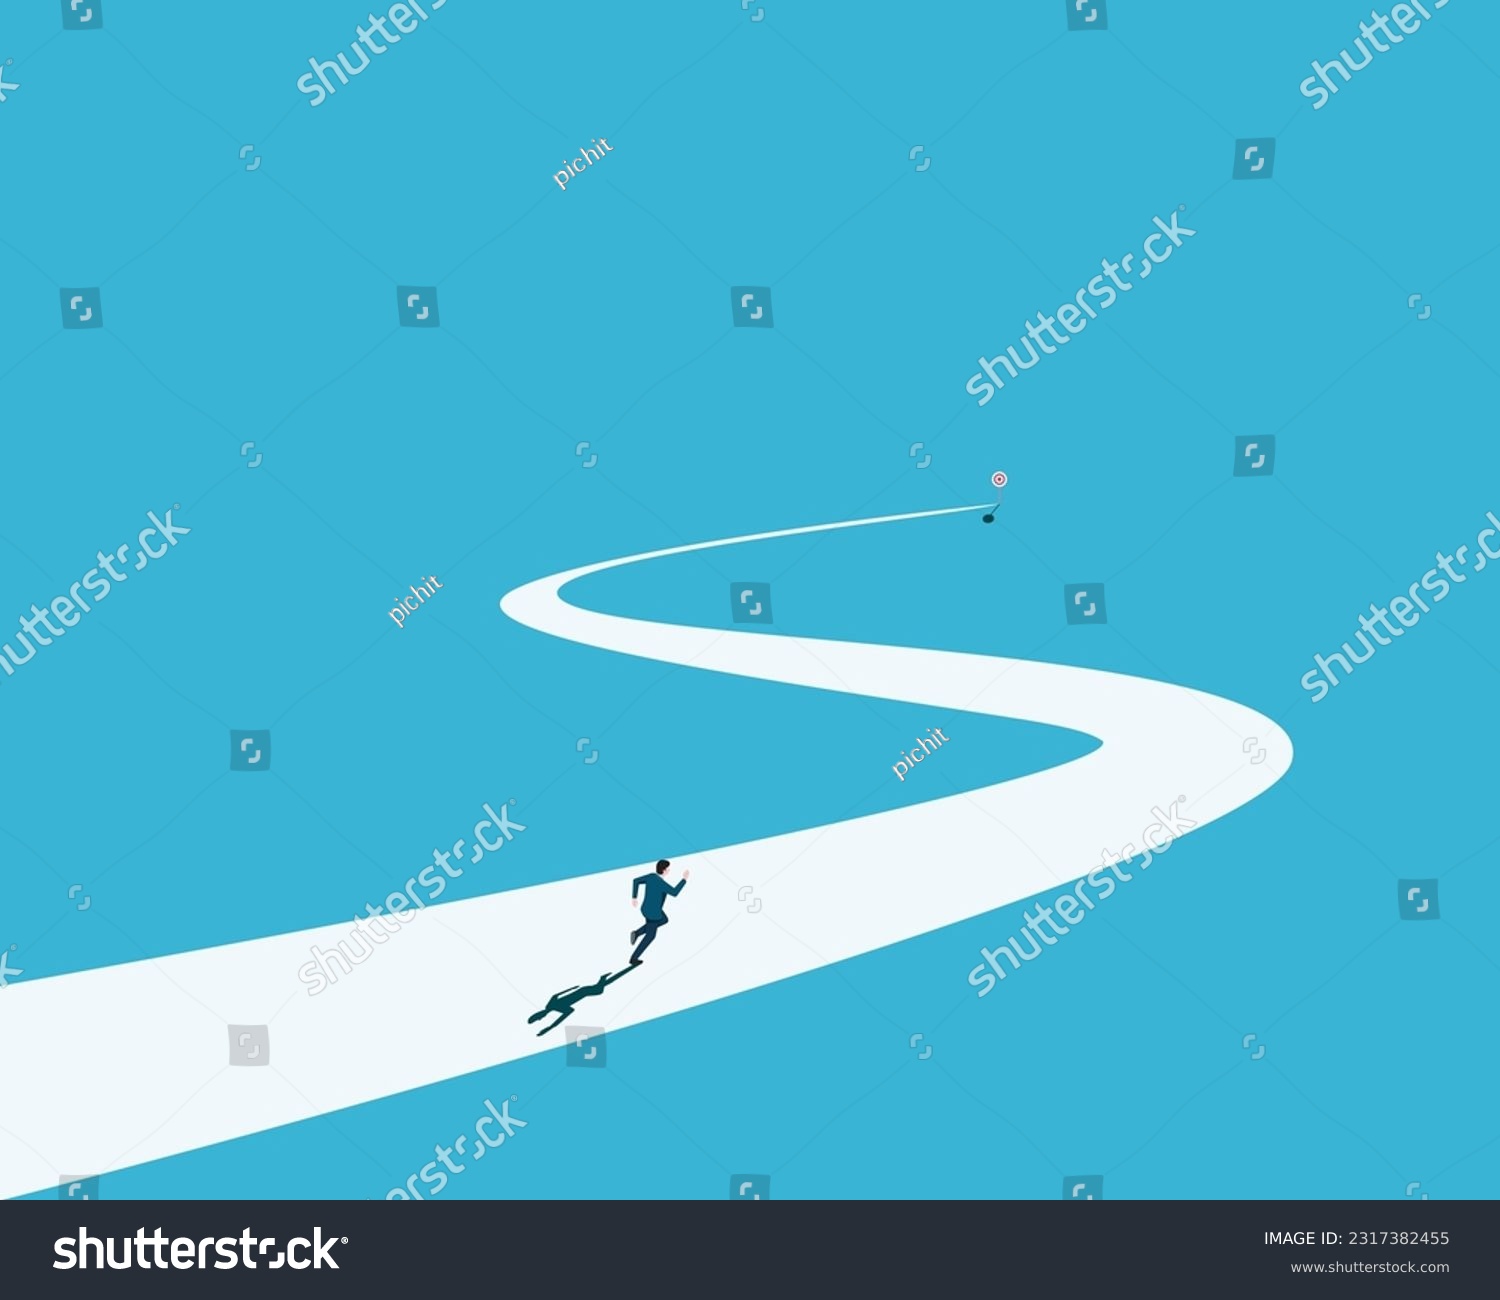 SVG of Business goal or vision concept. businessman running on away winding path. symbol of ambition, active, motivation, and a long road ahead. new opportunities concept. vector illustration flat svg